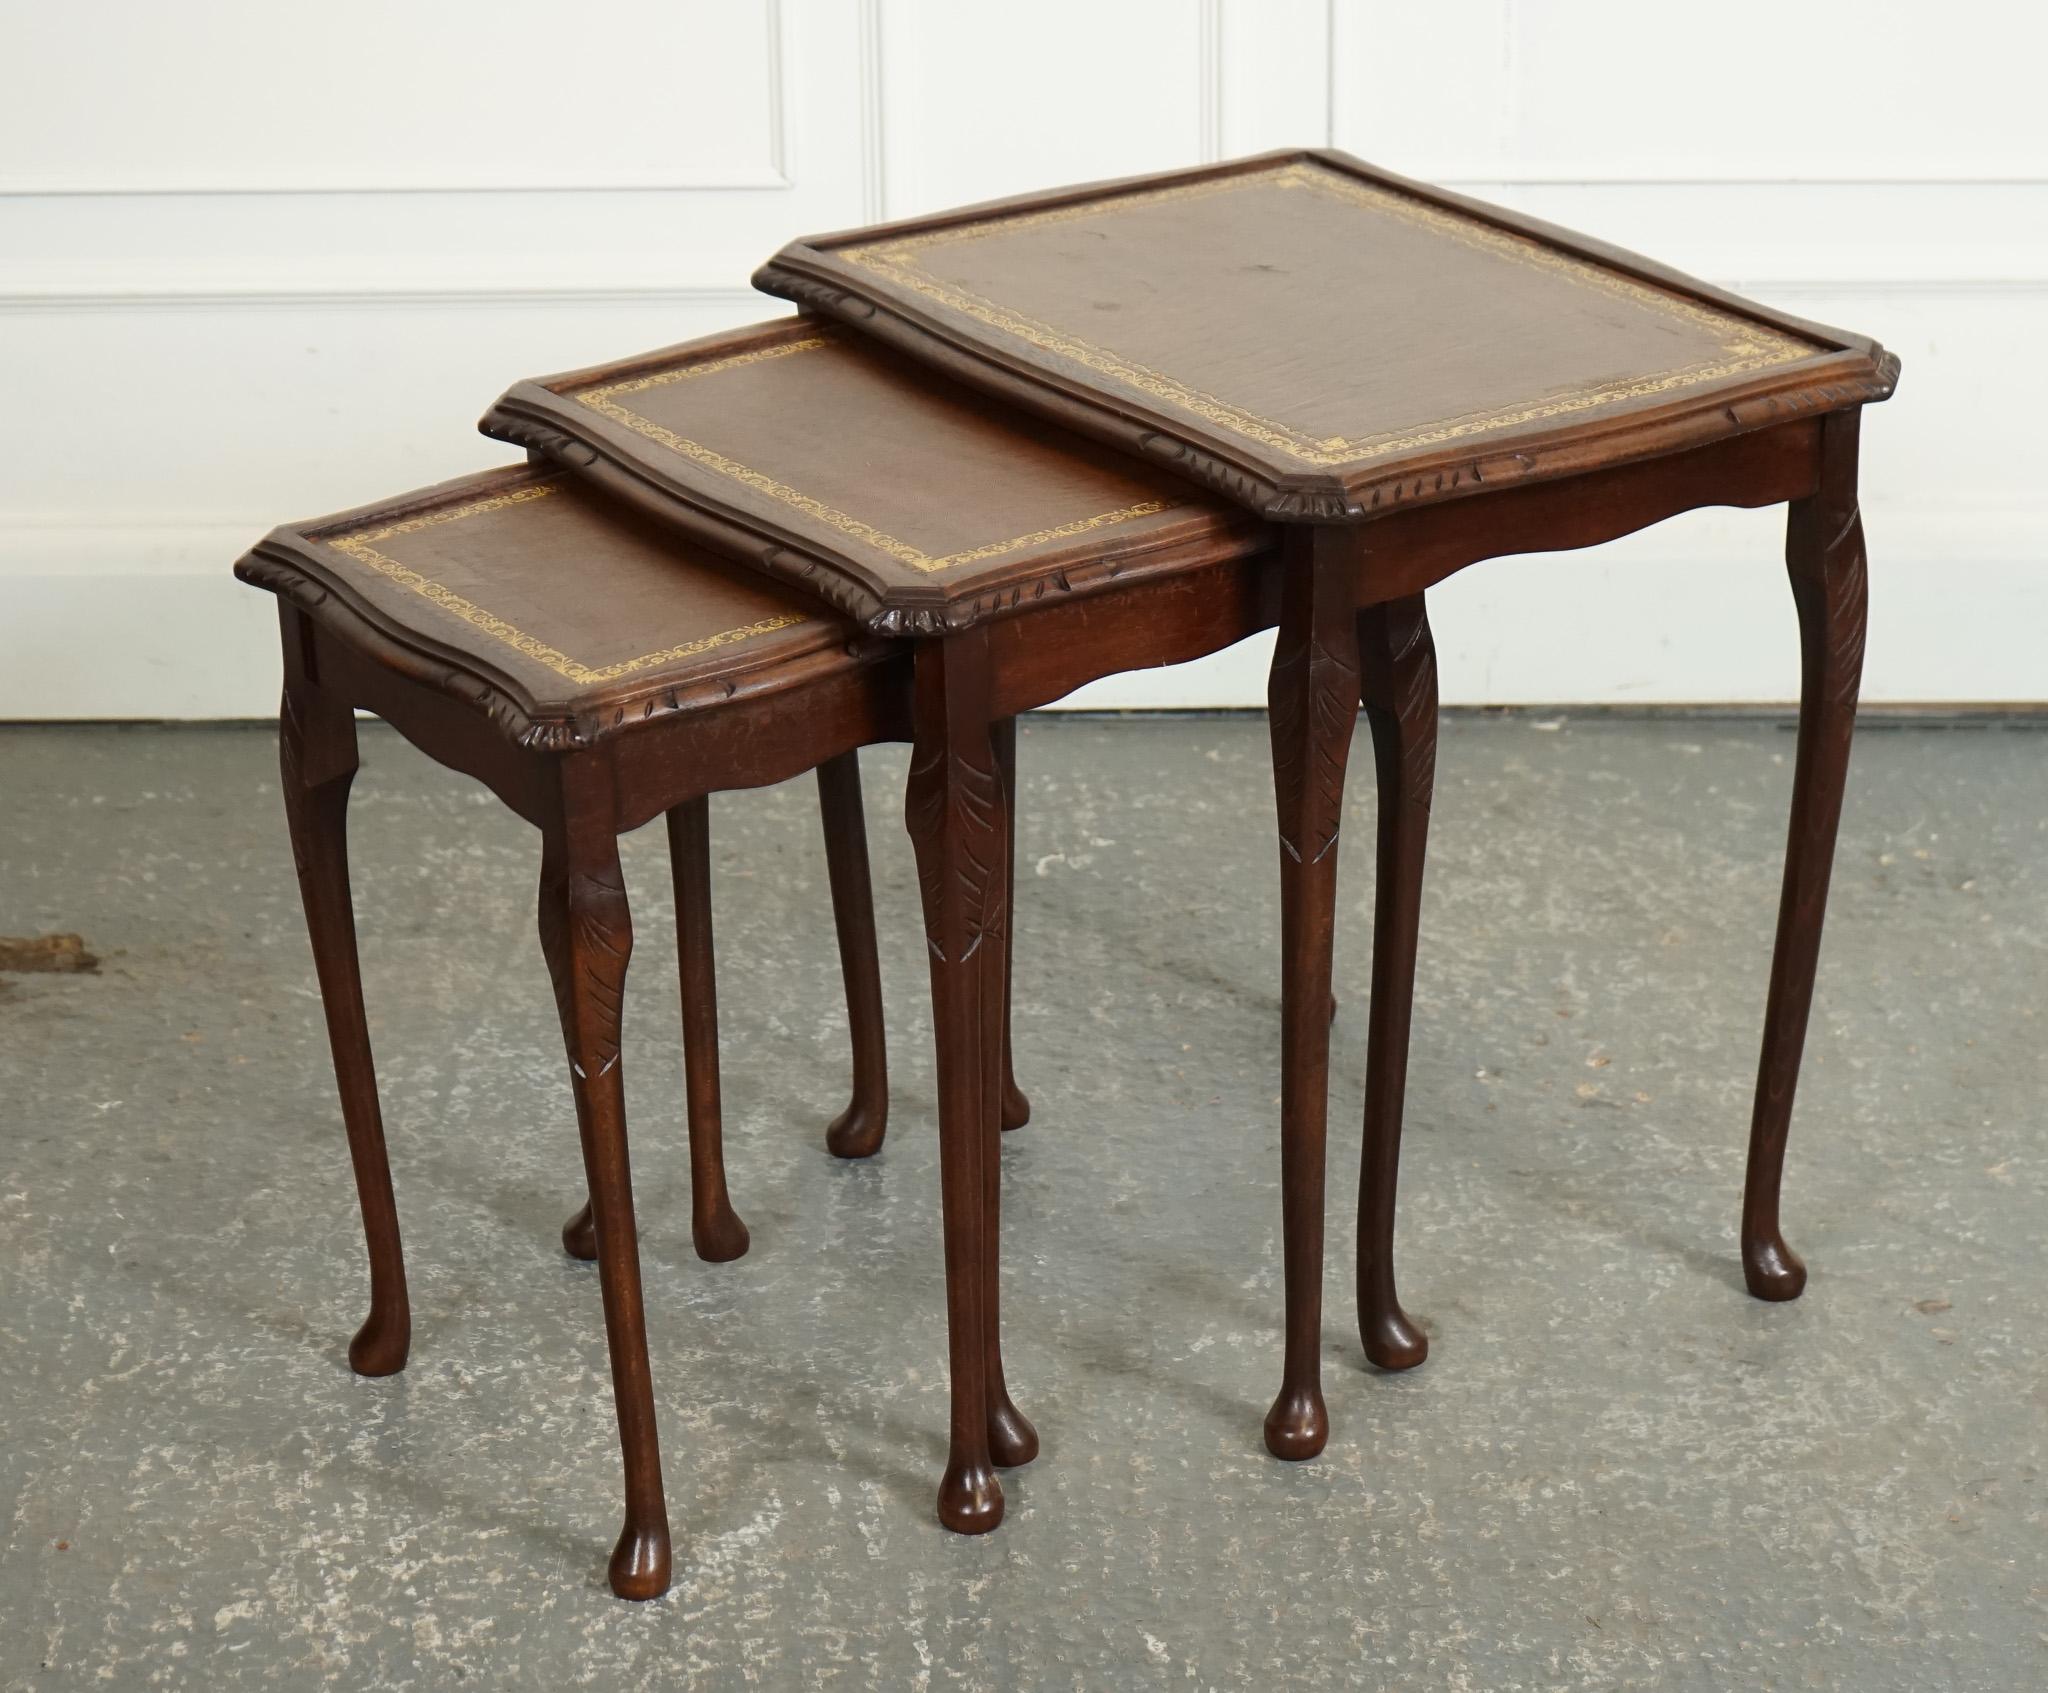 Britannique VINTAGE NEST OF TABLES QUEEN ANNE STYLE LEGS WiTH BROWN EMBOSsed LEATHER top en vente